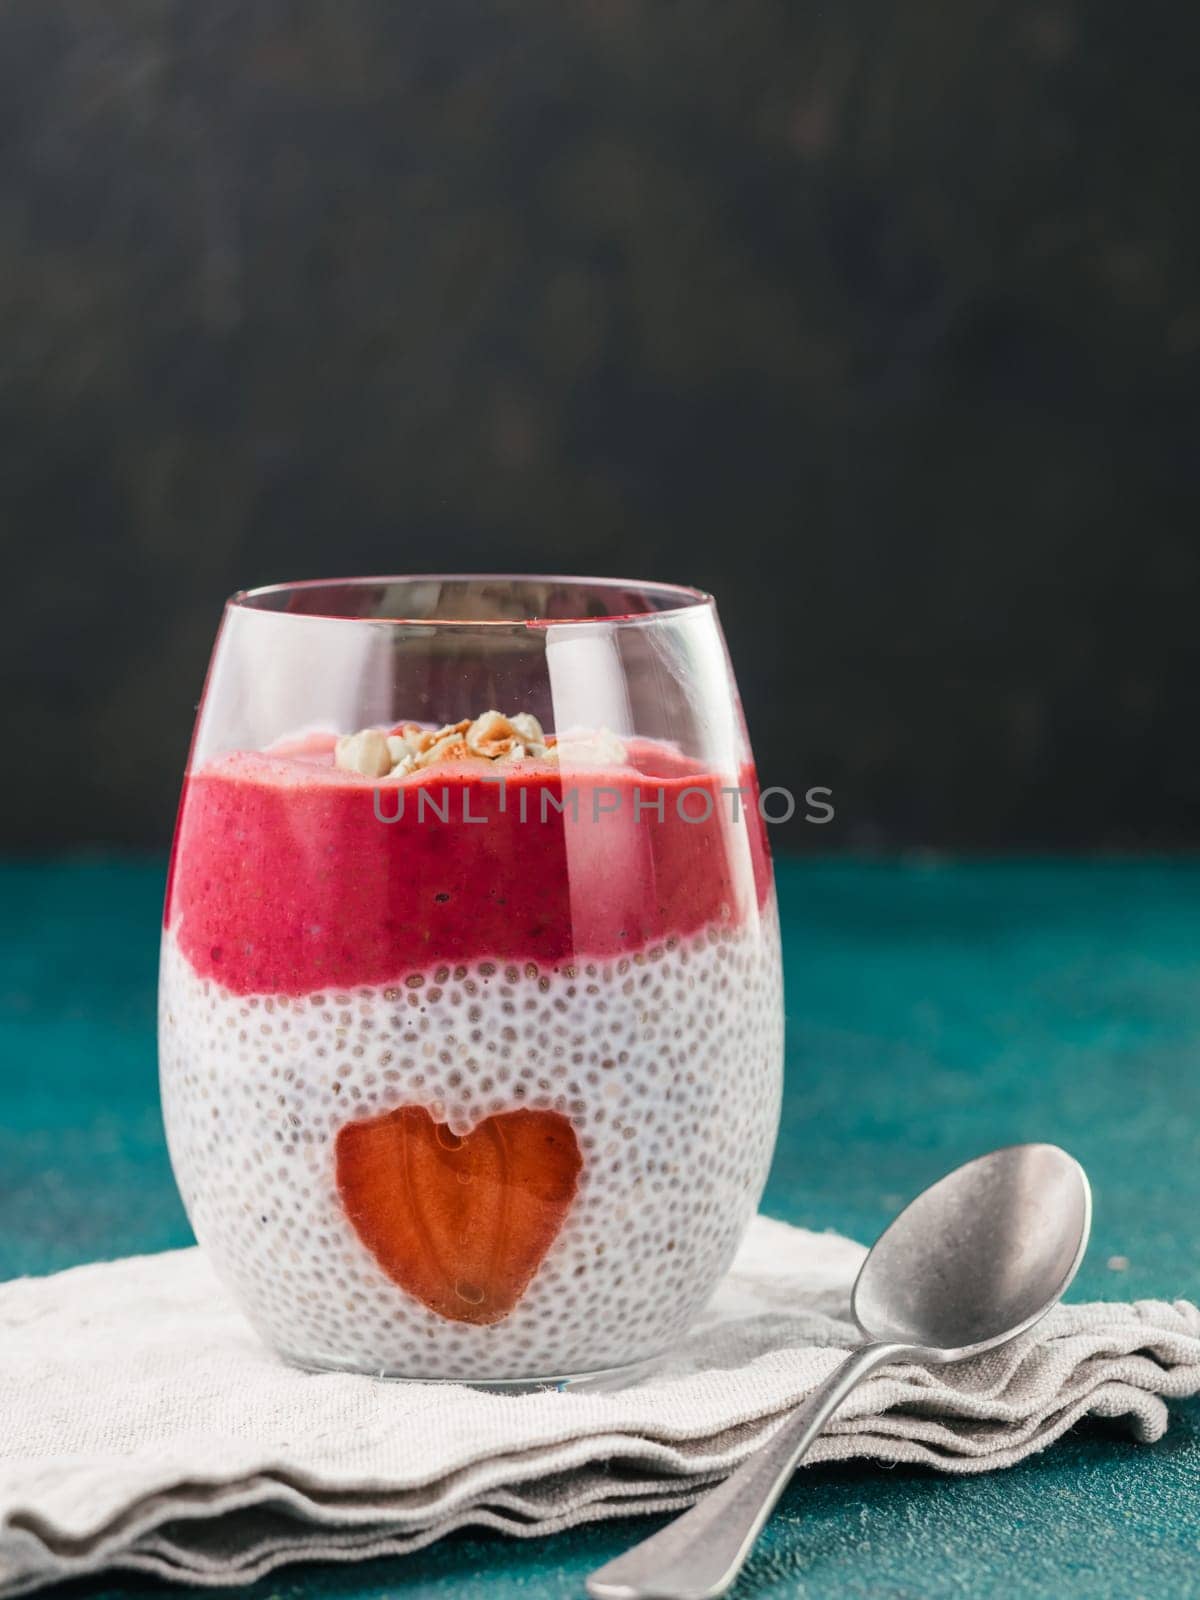 Valentine's Day Chia pudding with strawberry heart by fascinadora